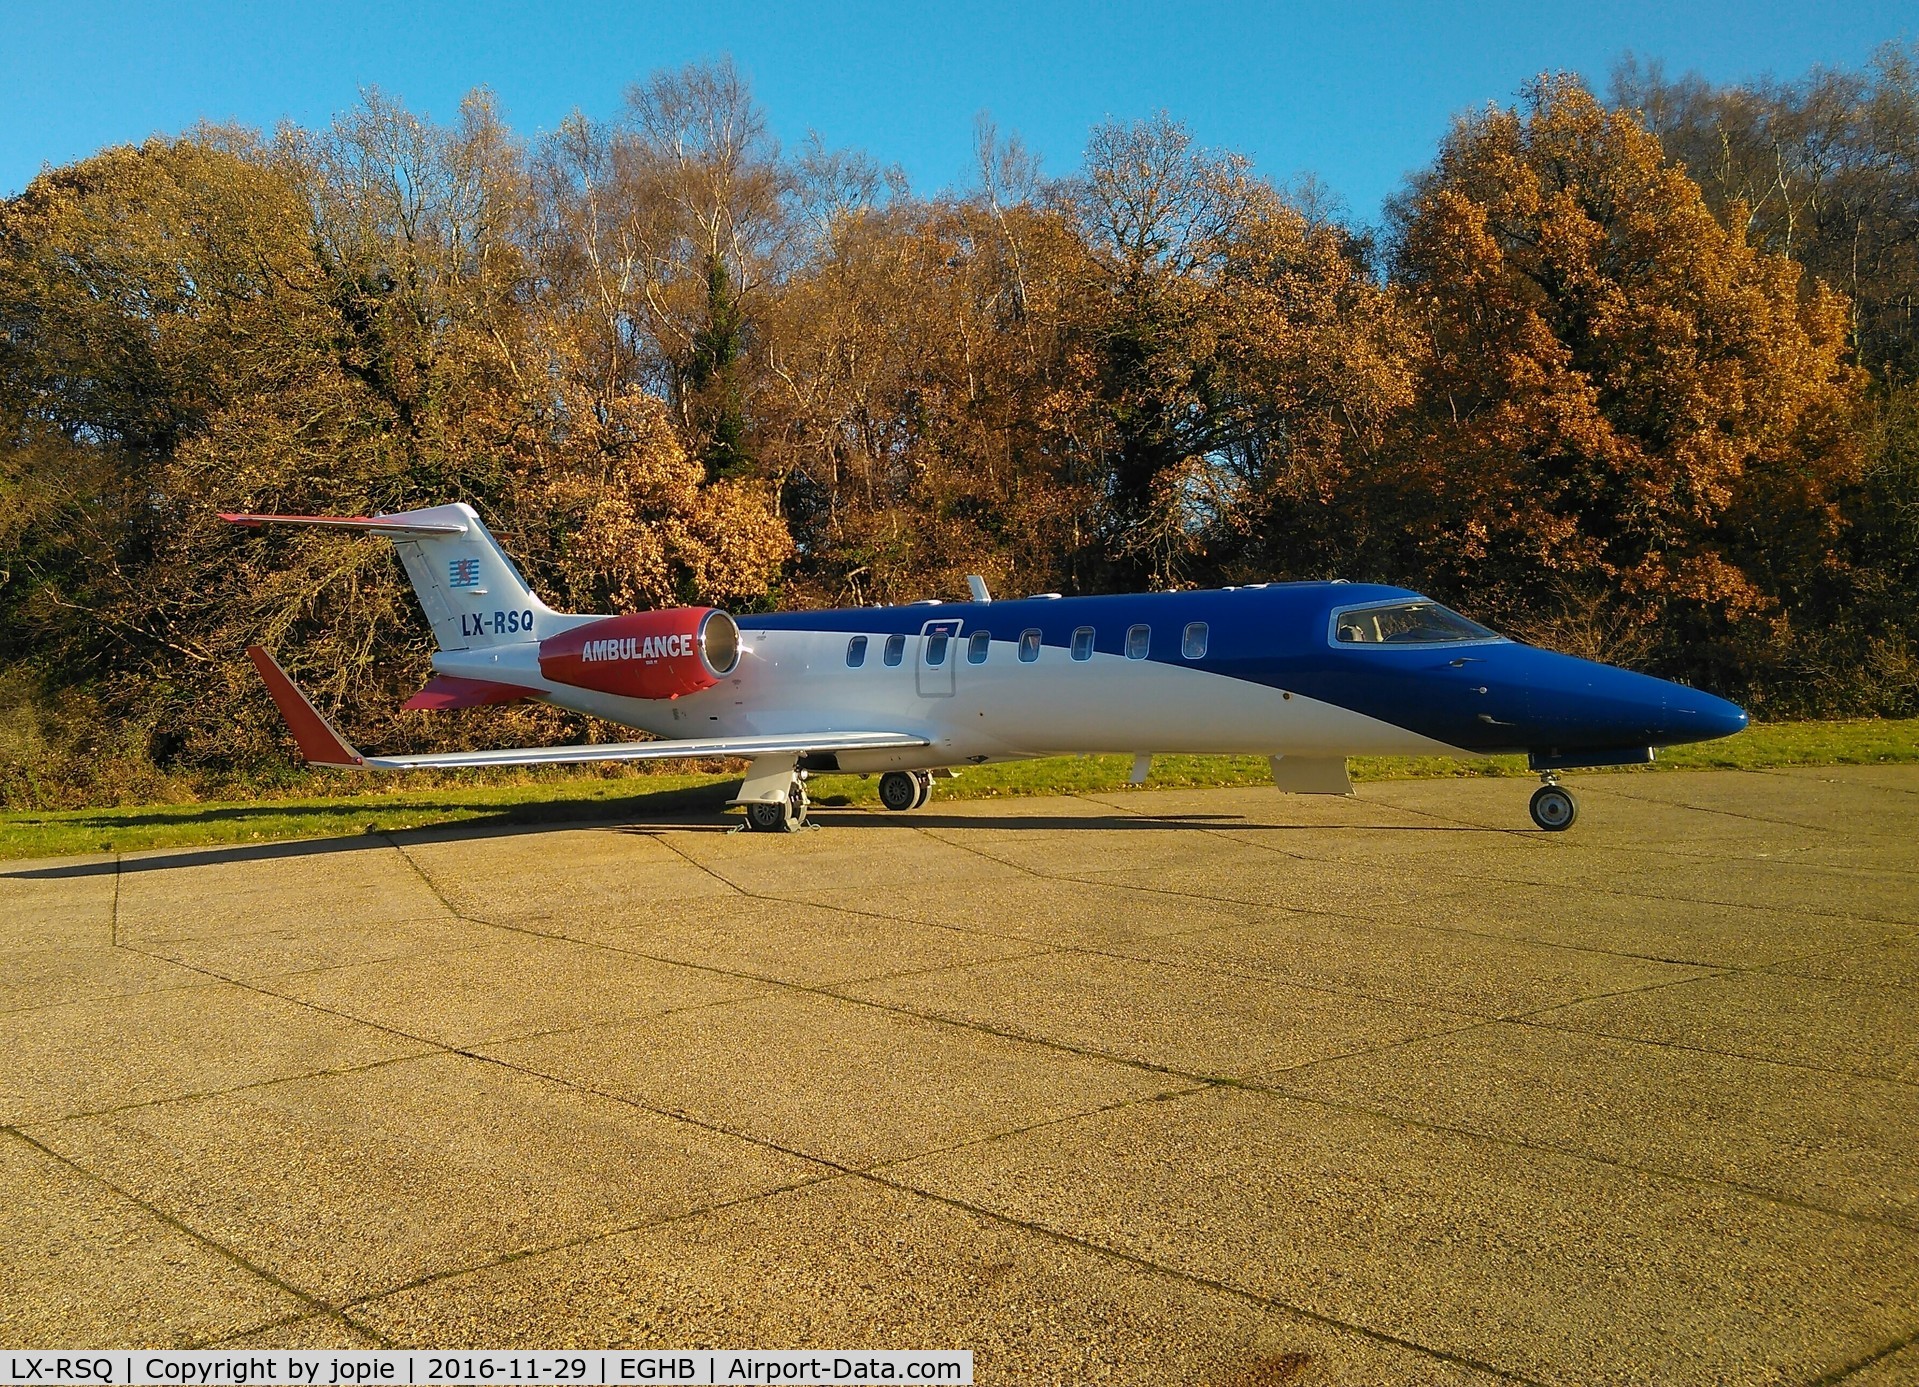 LX-RSQ, 2009 Learjet 45 C/N 398, the new rsq, please adjust data base, its learjet 45-398 now.